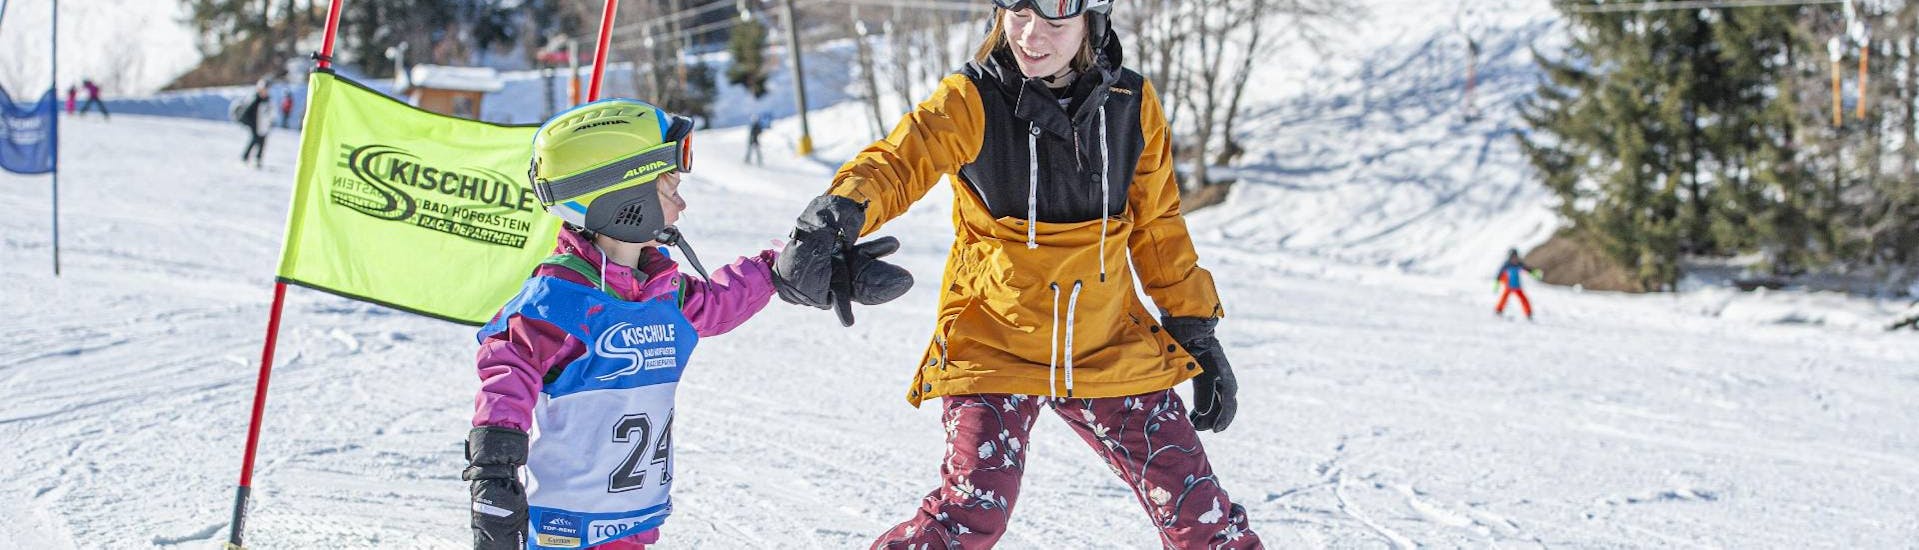 An older child helping a younger one during their kids ski lessons for beginners with skischule Bad Hofgastein.